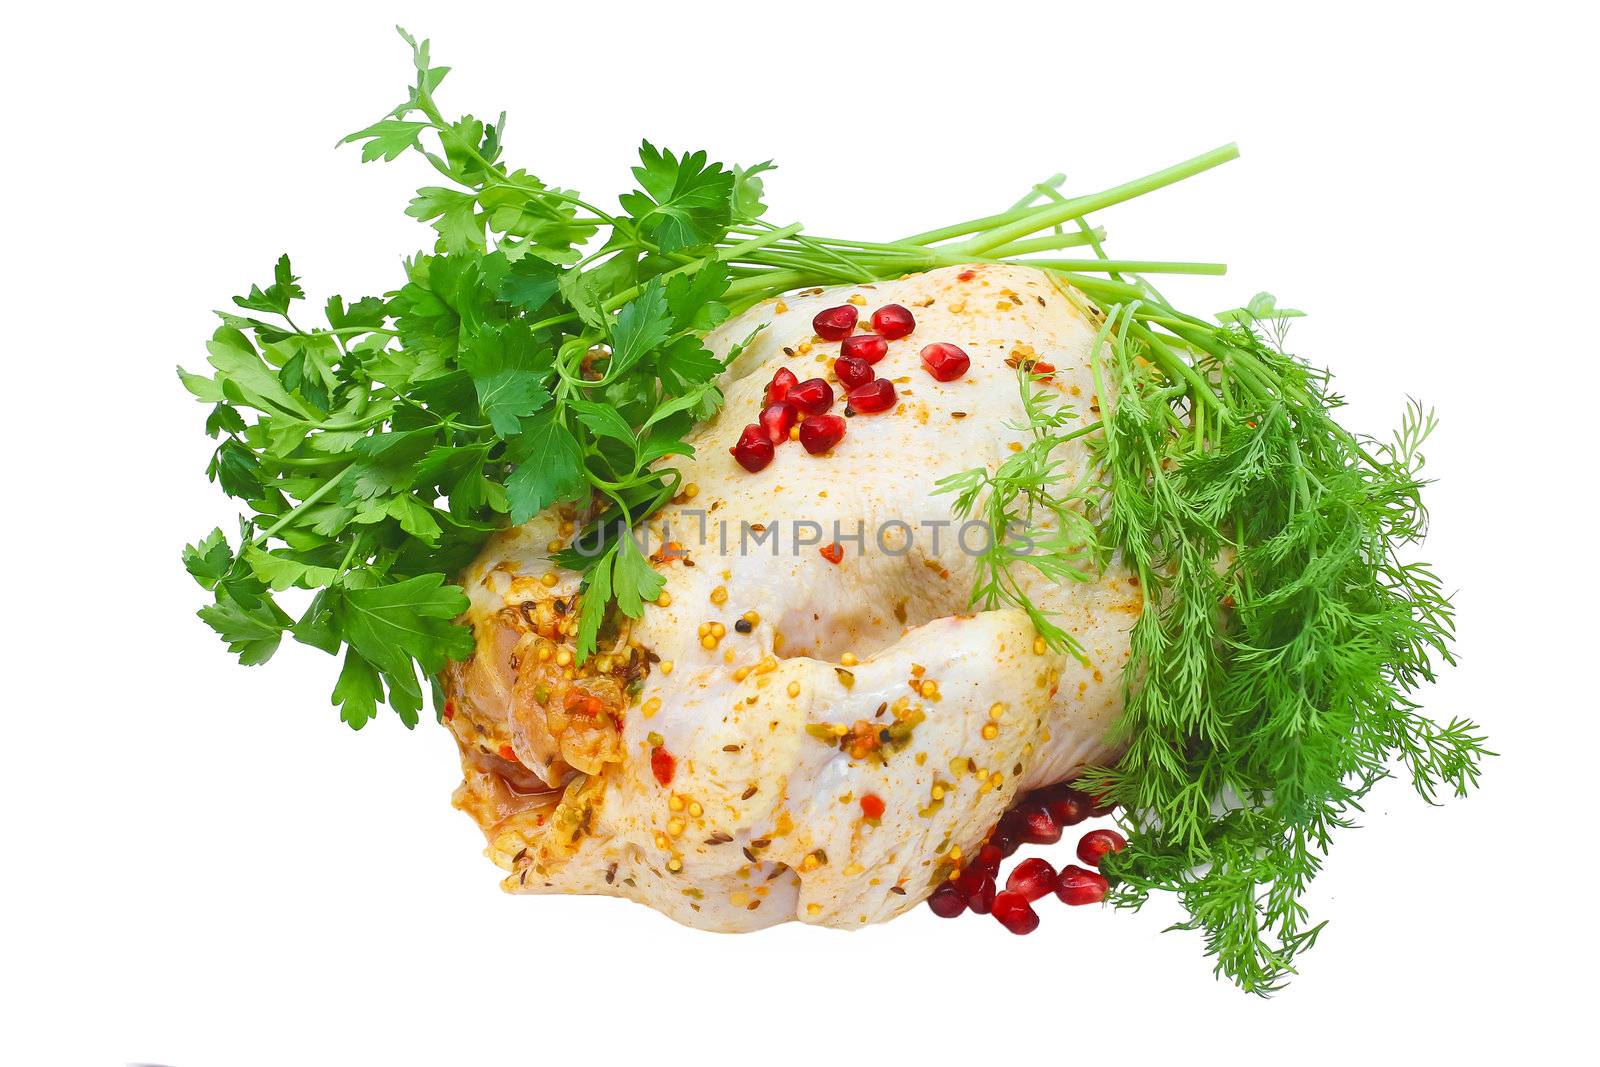 Chicken marinated with herbs on a white background